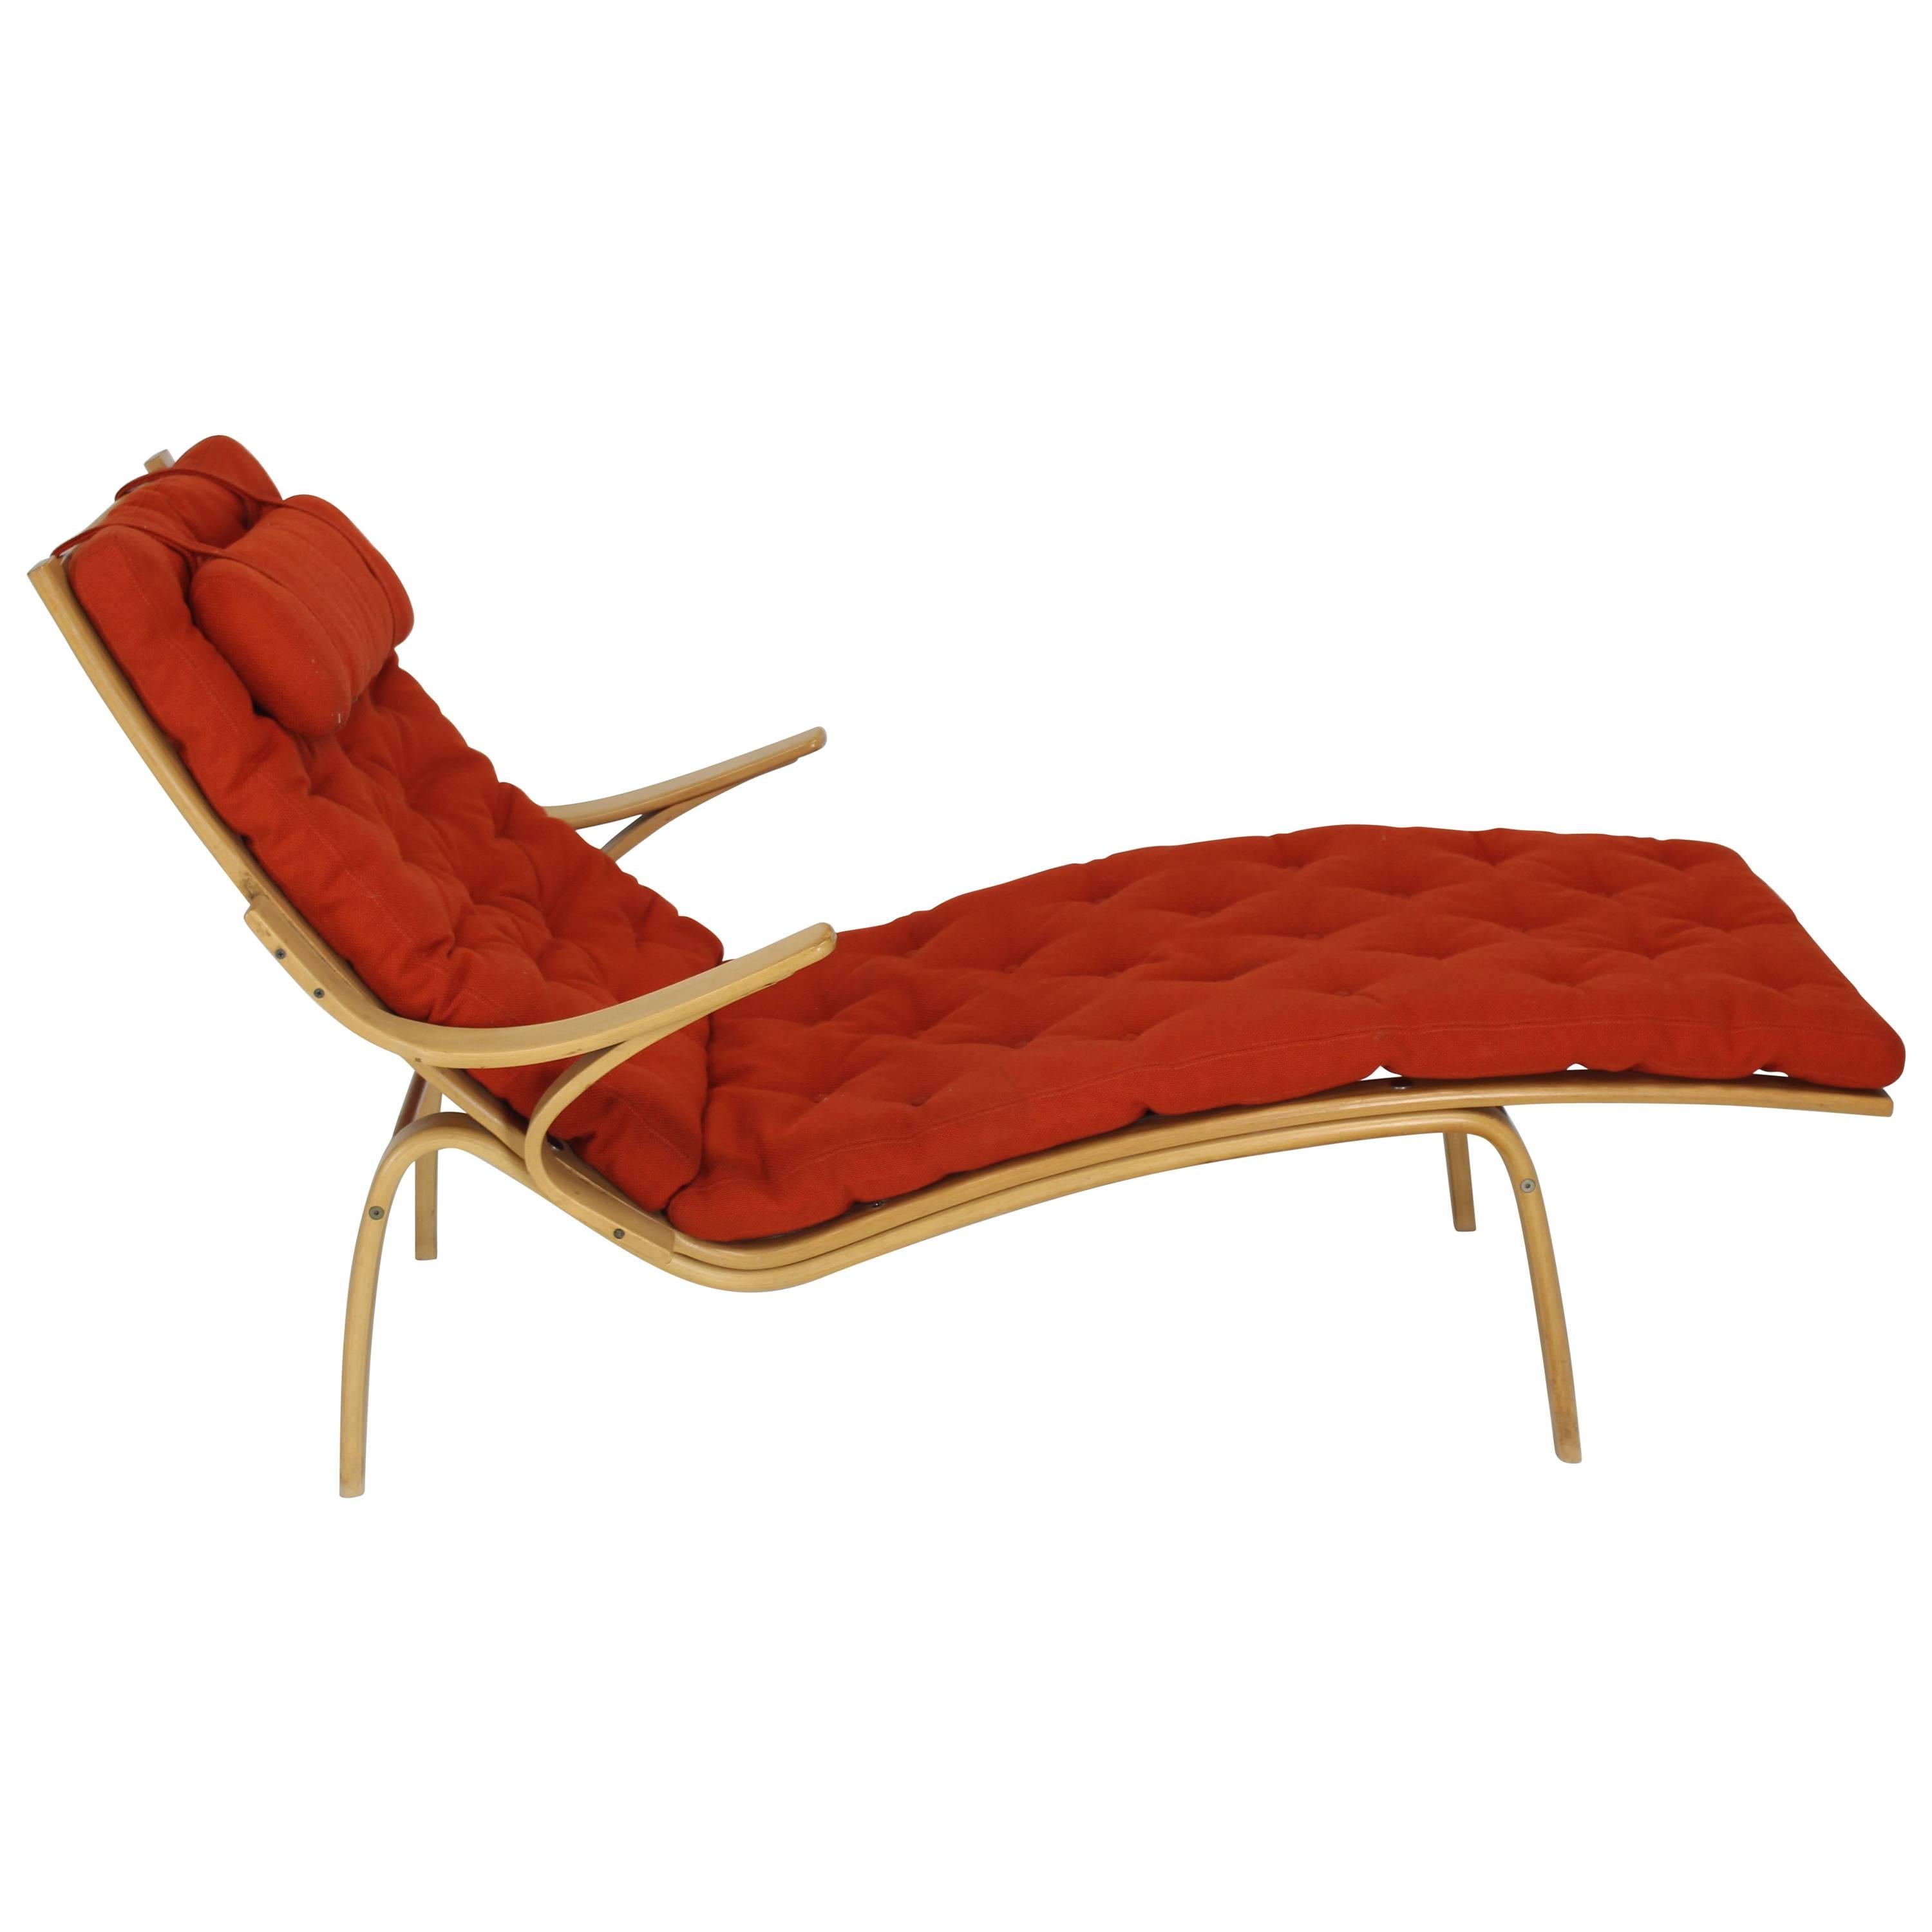 Bentwood Wool Upholstery Chaise Lounge Chair by Alvar Aalto for Artek 